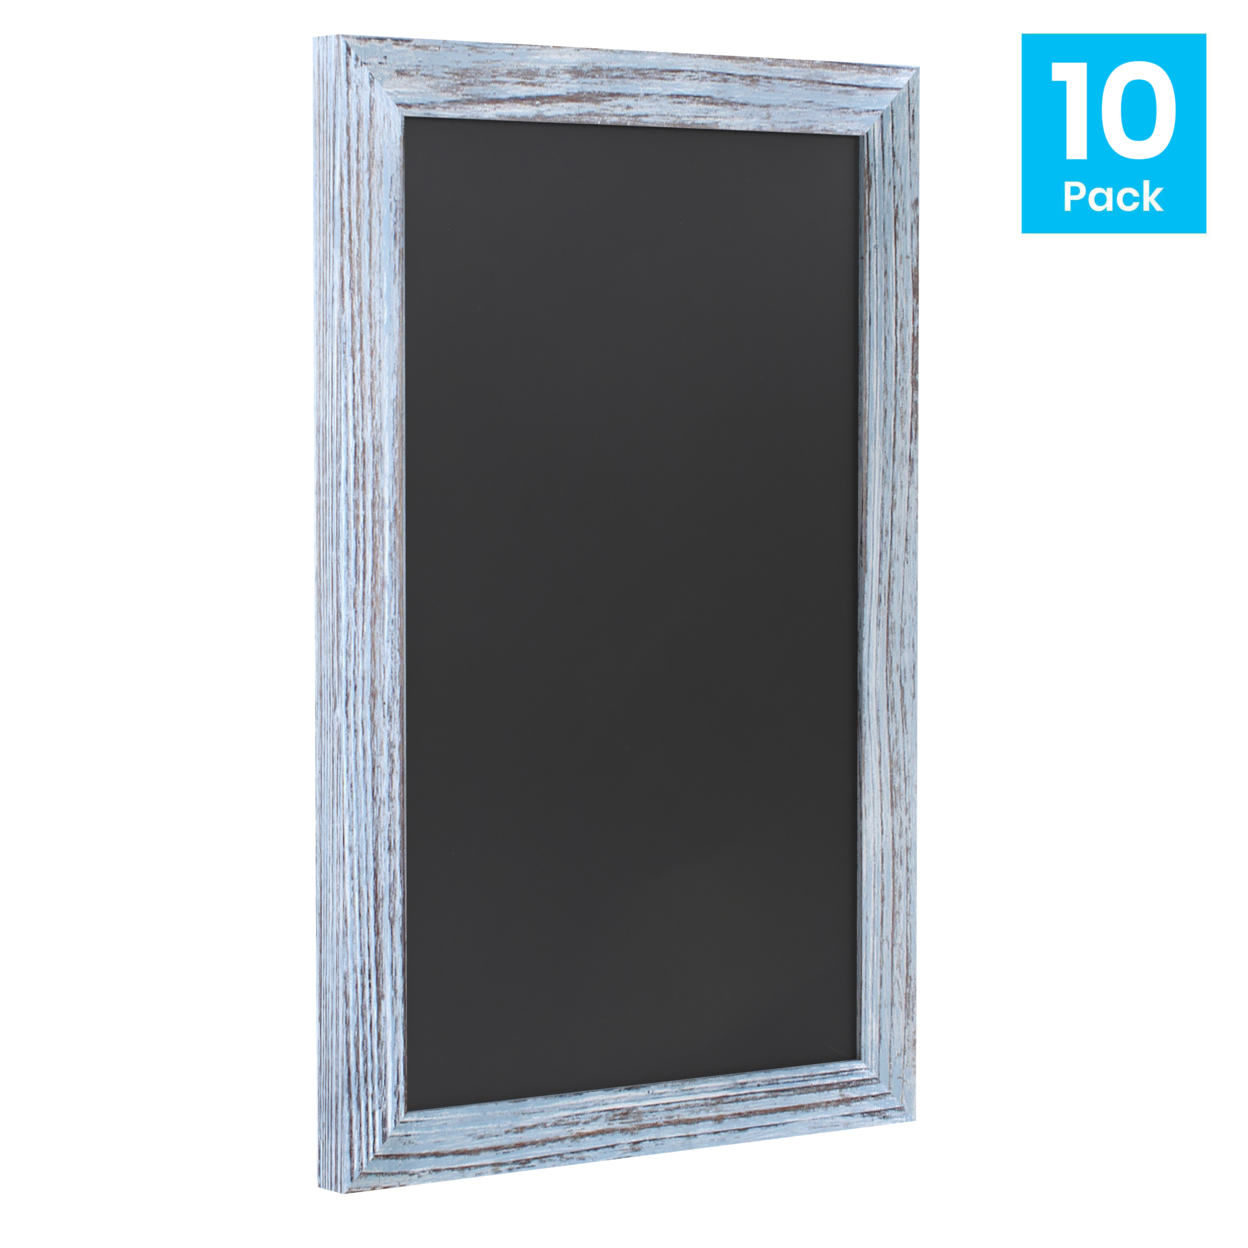 Classic Wall Mount Magnetic Chalkboard With Eraser, Rustic Blue Wood Frame